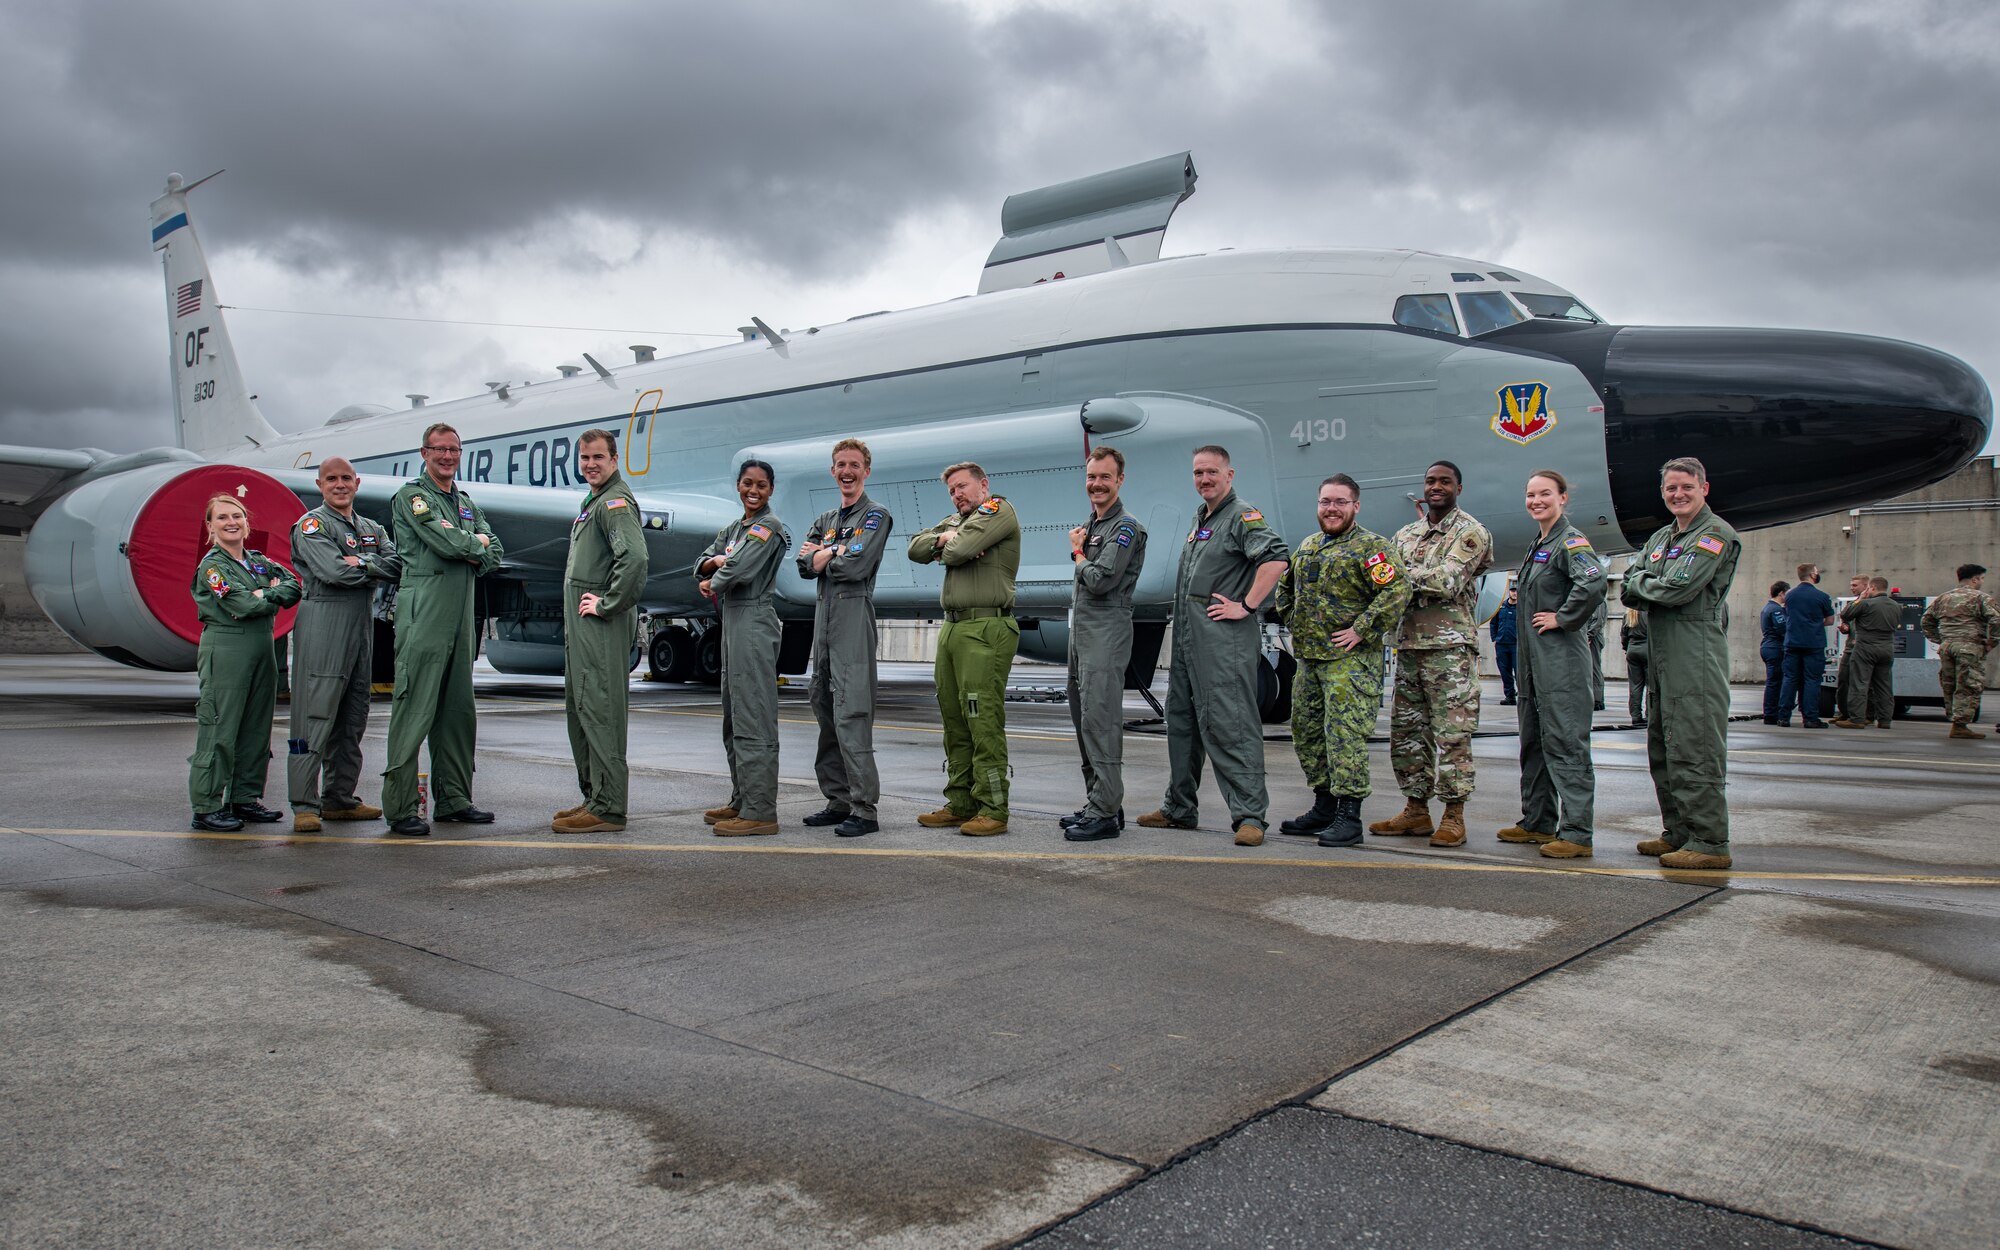 Military members from the U.S., New Zealand and Canada pose in front of a U.S. Air Force plane